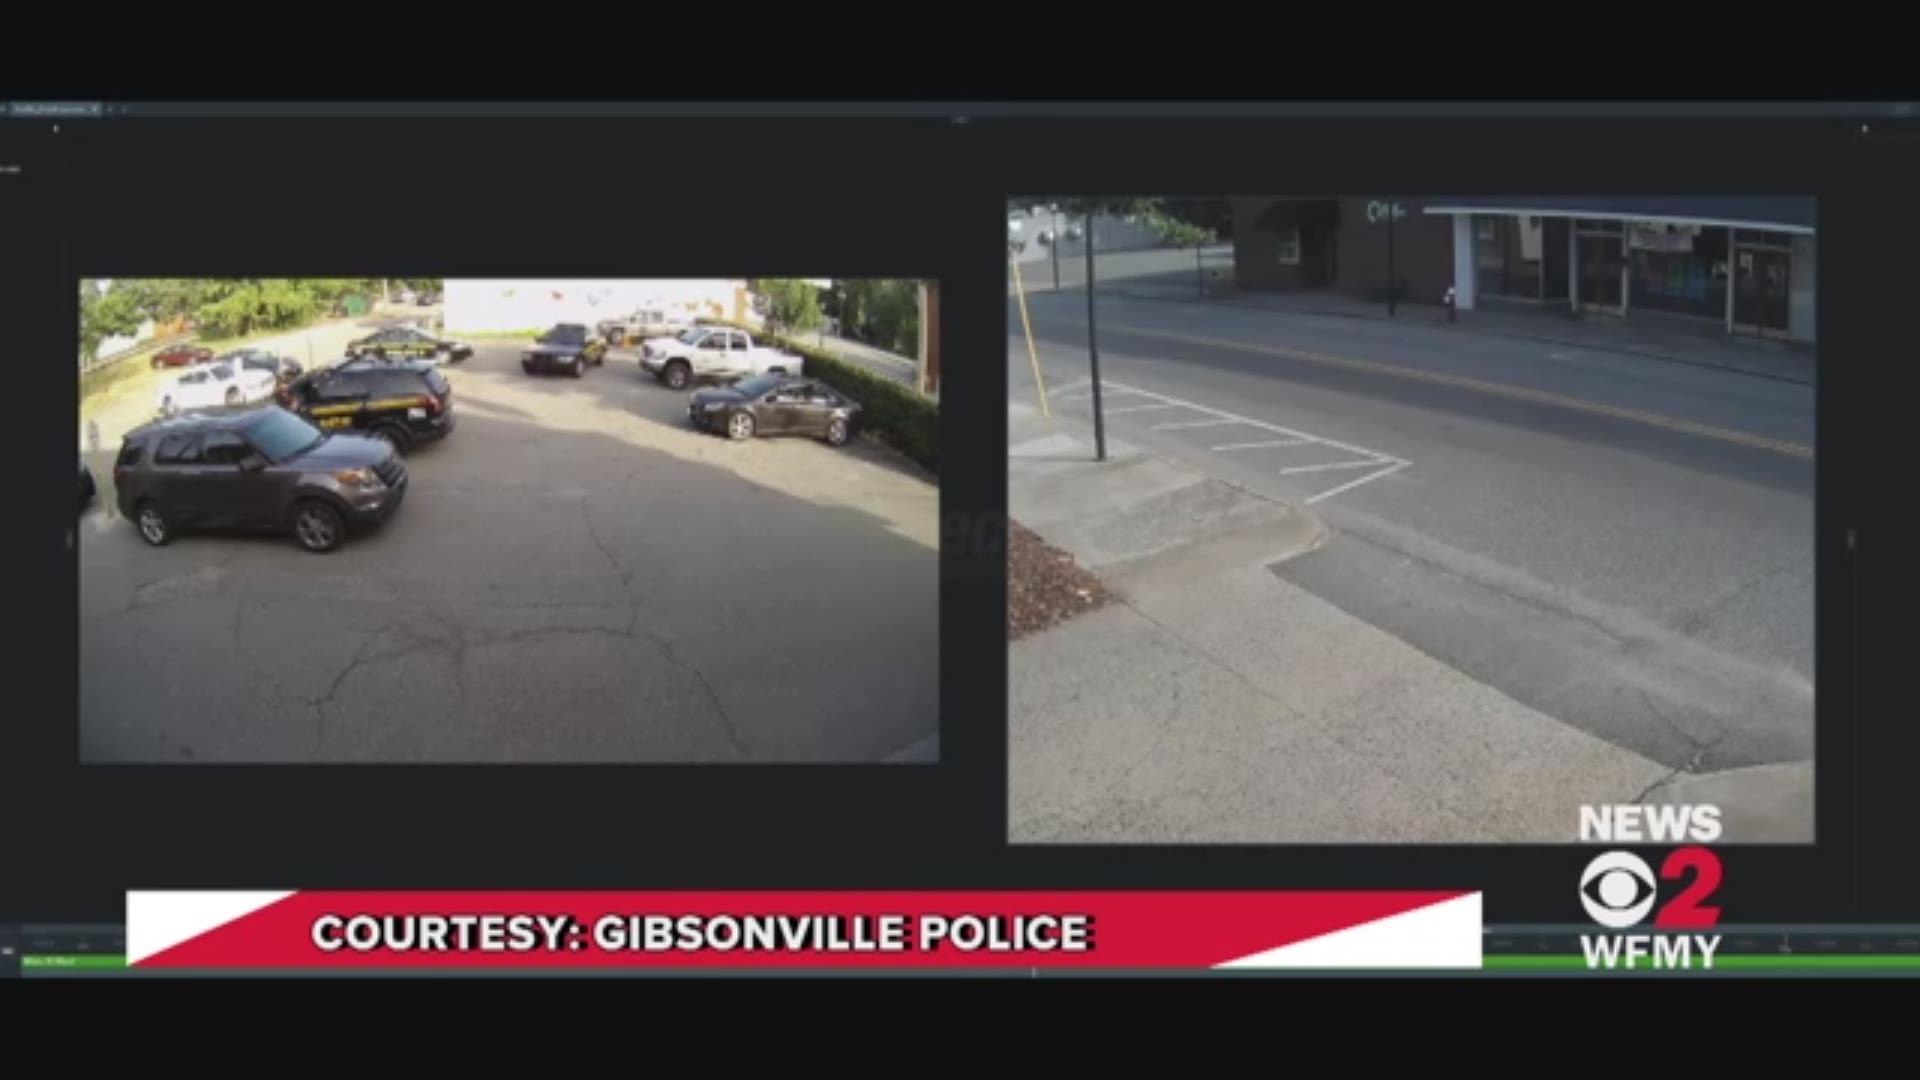 The moment a Gibsonville police car lost control and crashed into a dance studio across the street, captured on the station's surveillance video.